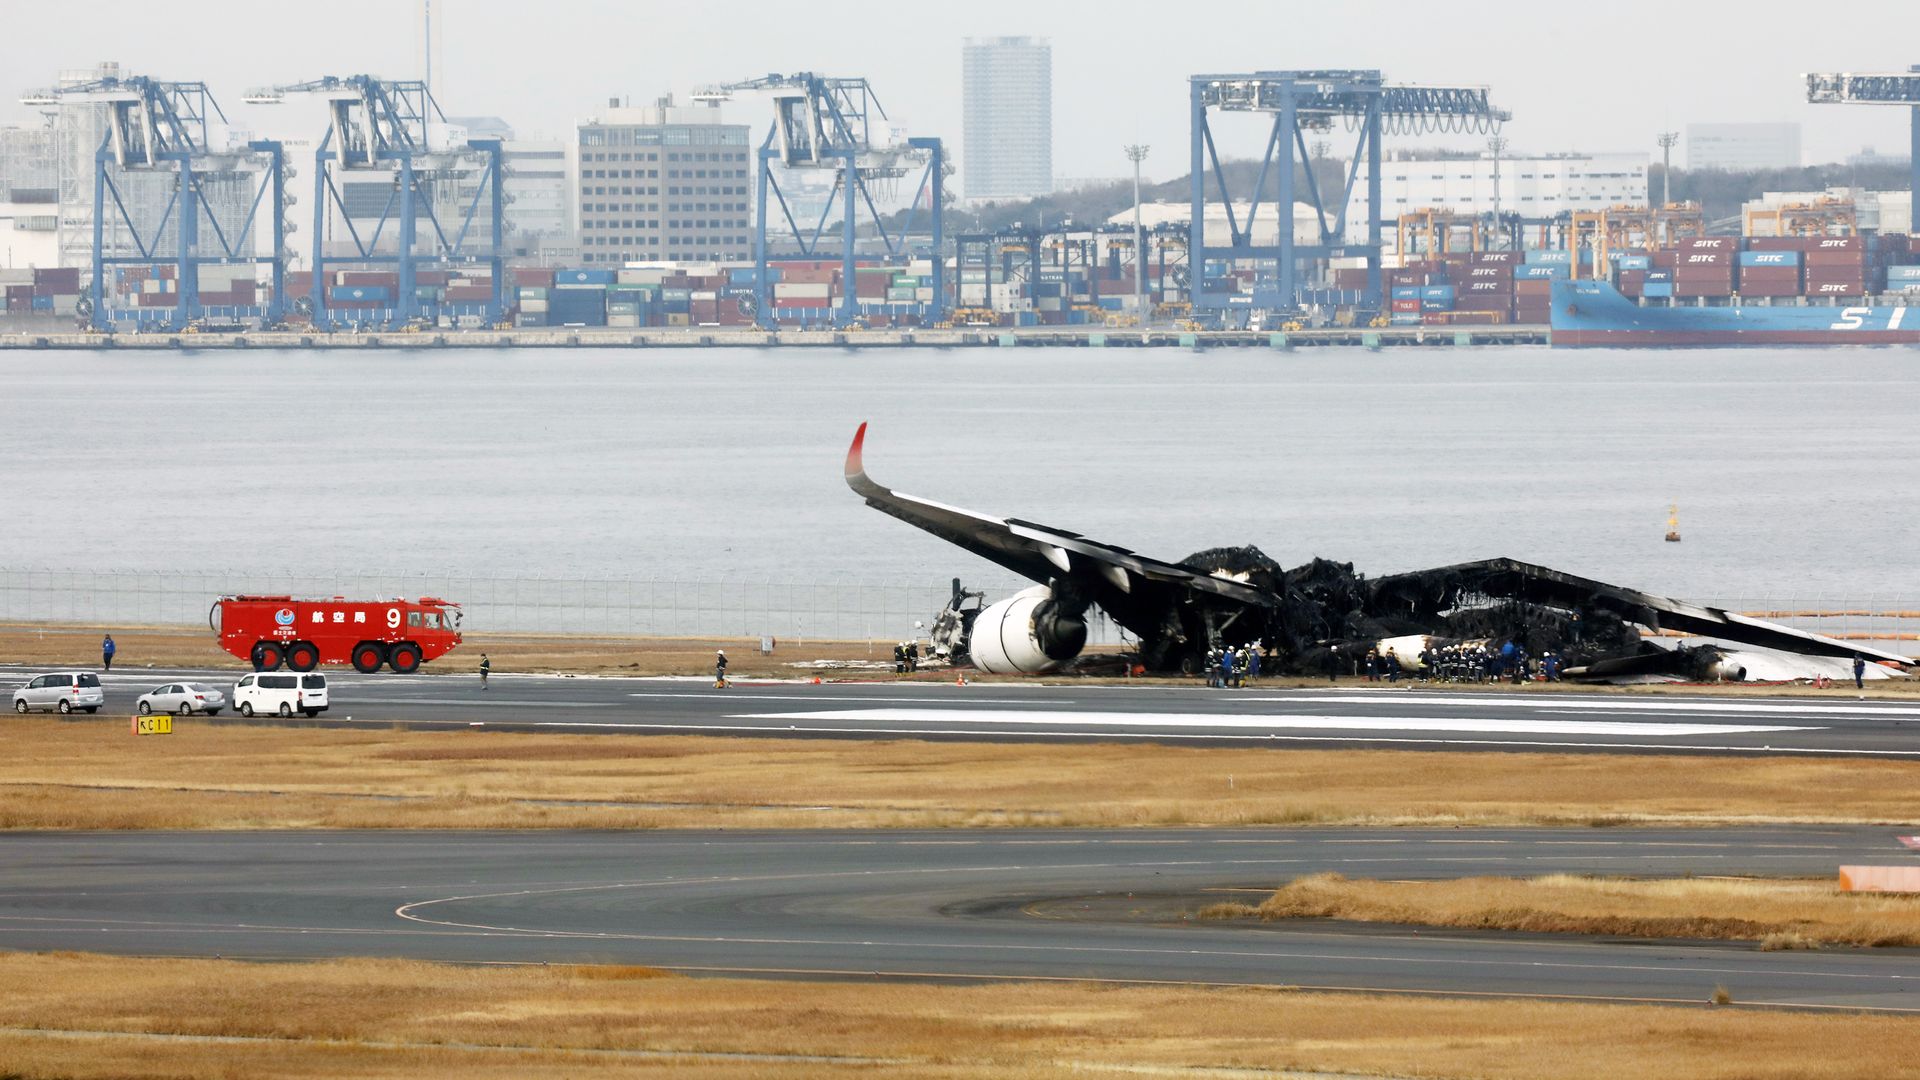 The remains of a Japan Airlines plane that caught fire after striking a Japan Coast Guard aircraft on Dec. 2.